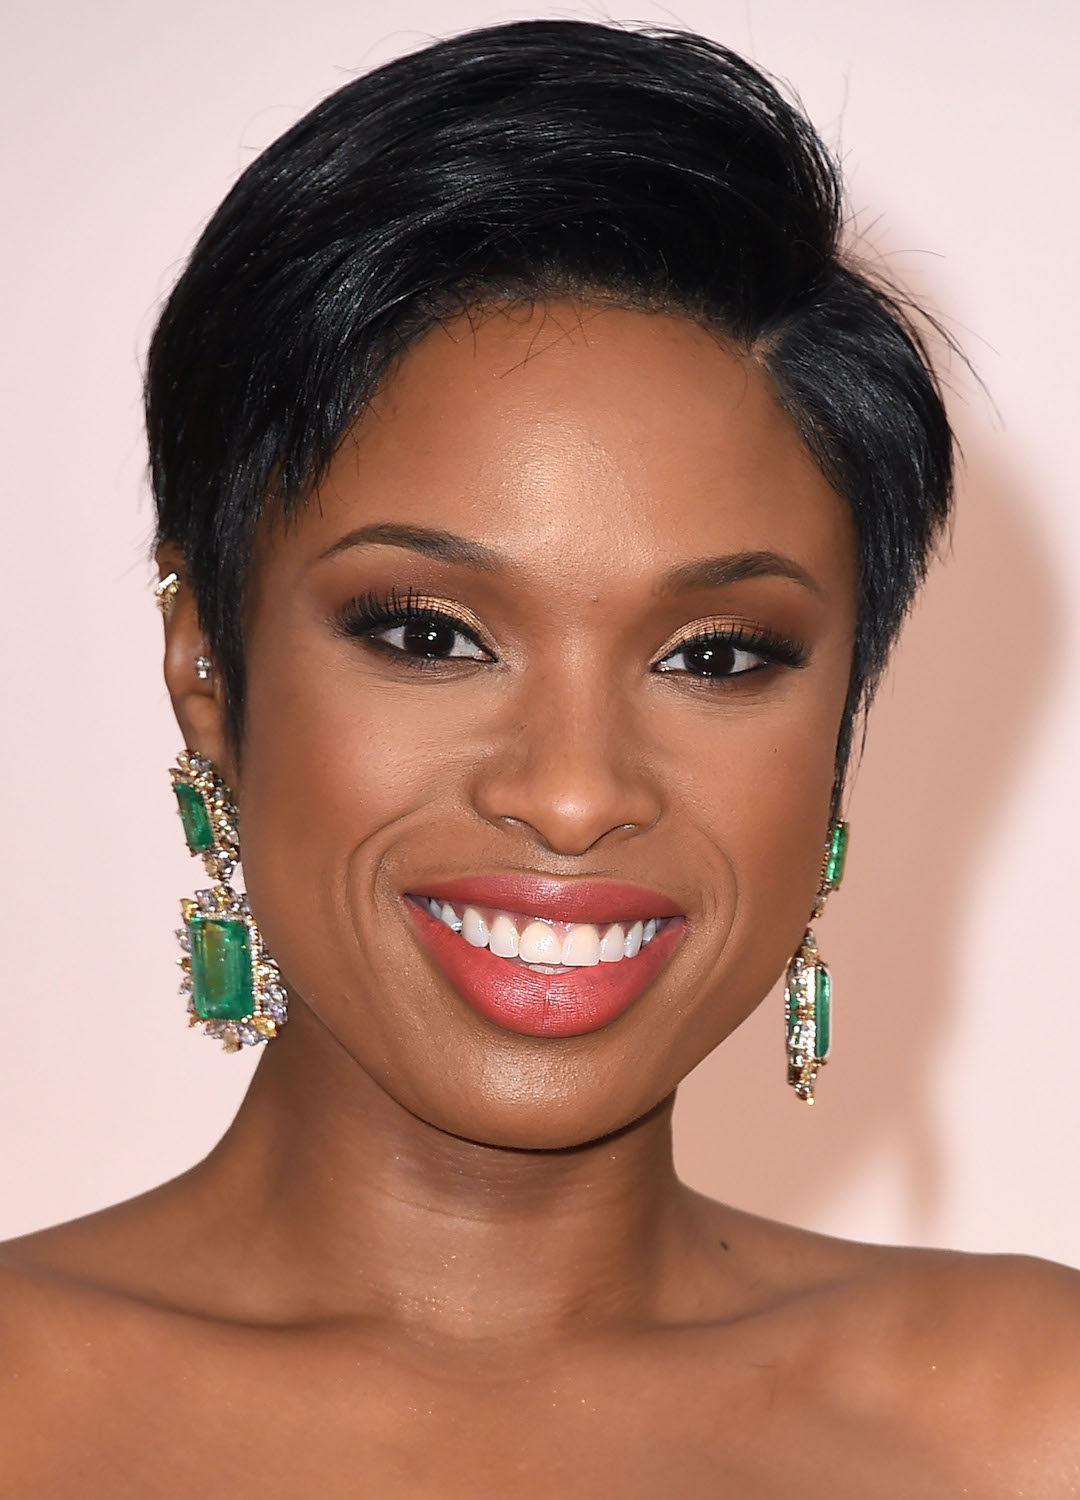 Jennifer Hudson arrives at the 87th Annual Academy Awards at Hollywood & Highland Center on February 22, 2015 in Hollywood, California